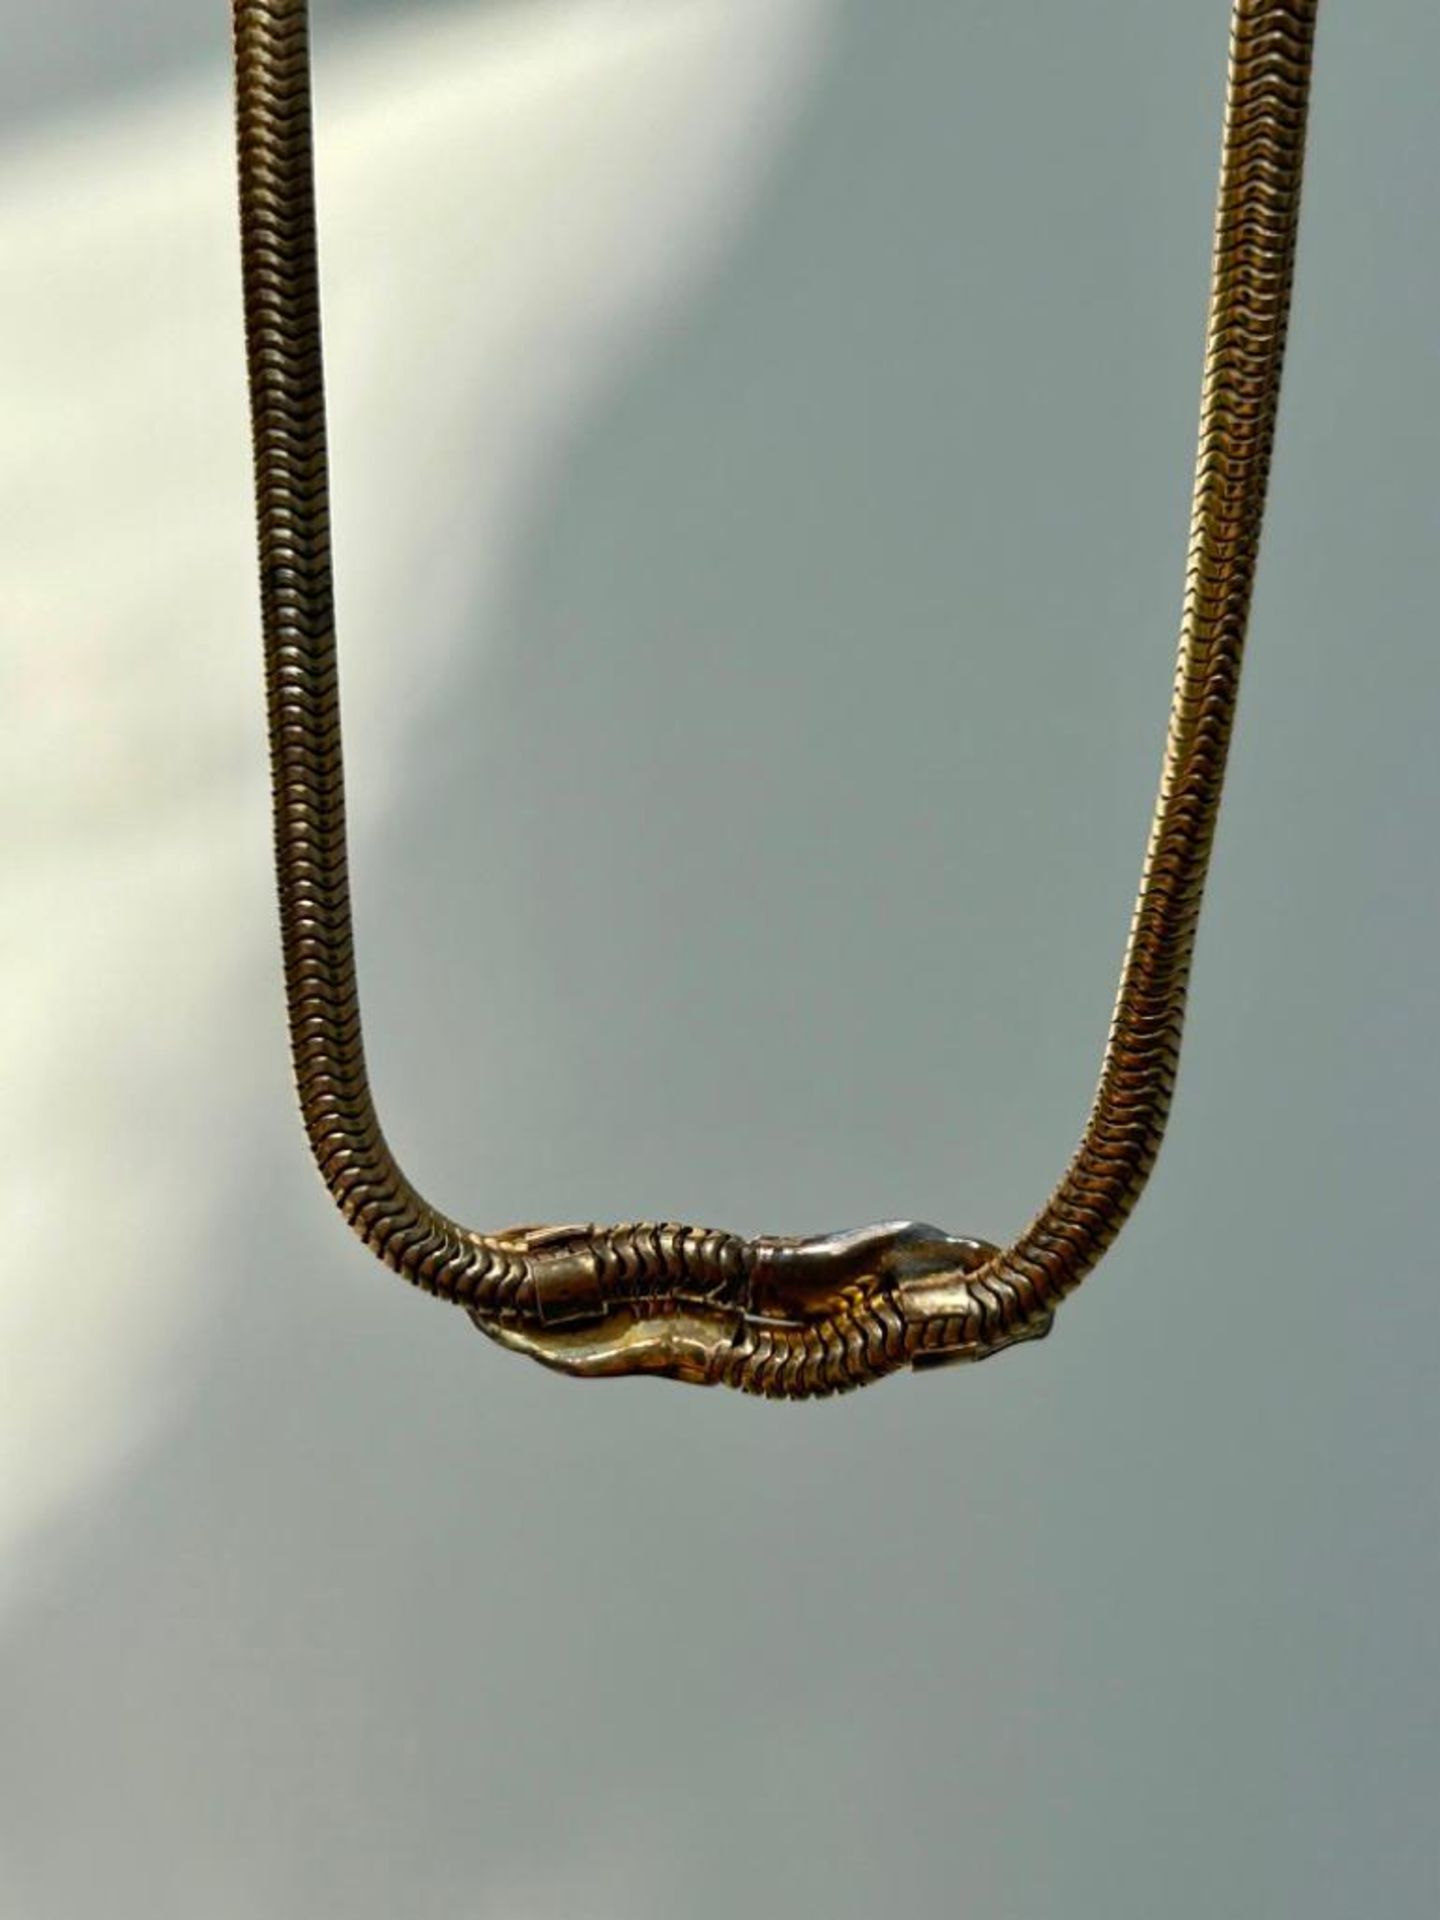 Double Headed Snake Necklace - Image 4 of 7